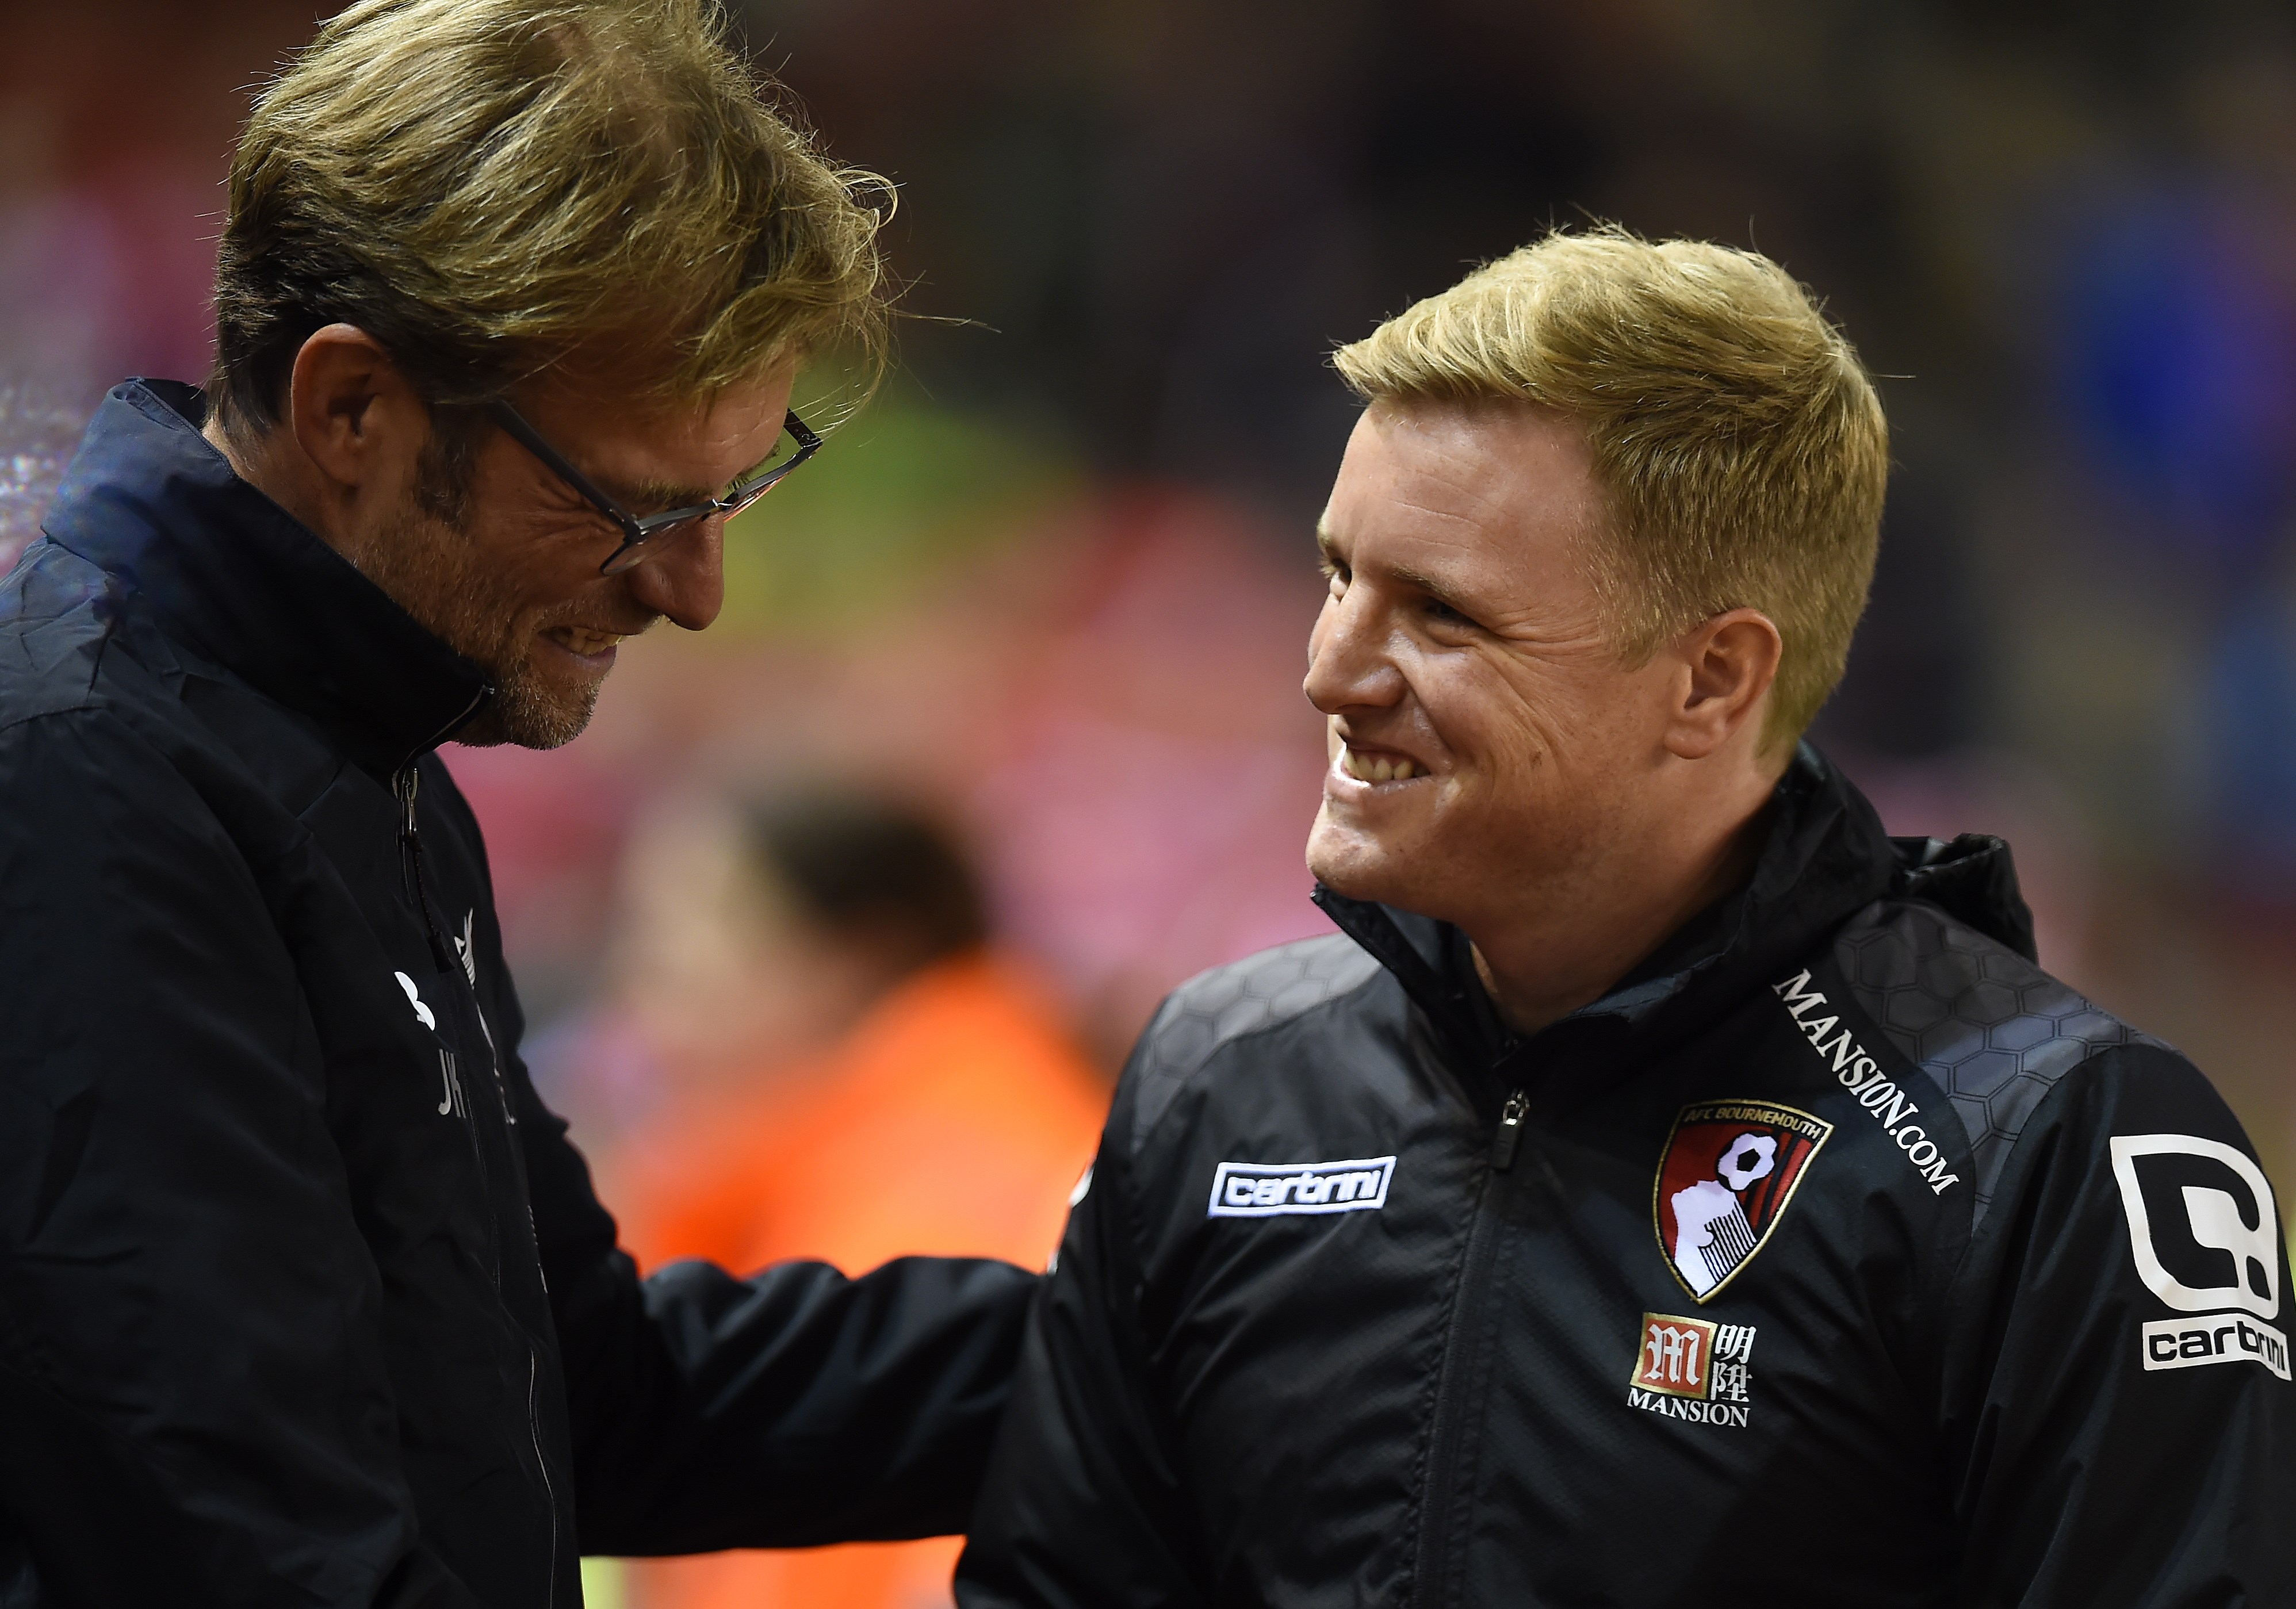 Liverpool's German manager Jurgen Klopp (L) shakes hands with Bournemouth's English manager Eddie Howe ahead of the English League Cup fourth round football match between Liverpool and Bournemouth at Anfield stadium in Liverpool, north west England on October 28, 2015. AFP PHOTO / PAUL ELLIS

RESTRICTED TO EDITORIAL USE. NO USE WITH UNAUTHORIZED AUDIO, VIDEO, DATA, FIXTURE LISTS, CLUB/LEAGUE LOGOS OR 'LIVE' SERVICES. ONLINE IN-MATCH USE LIMITED TO 75 IMAGES, NO VIDEO EMULATION. NO USE IN BETTING, GAMES OR SINGLE CLUB/LEAGUE/PLAYER PUBLICATIONS.        (Photo credit should read PAUL ELLIS/AFP/Getty Images)